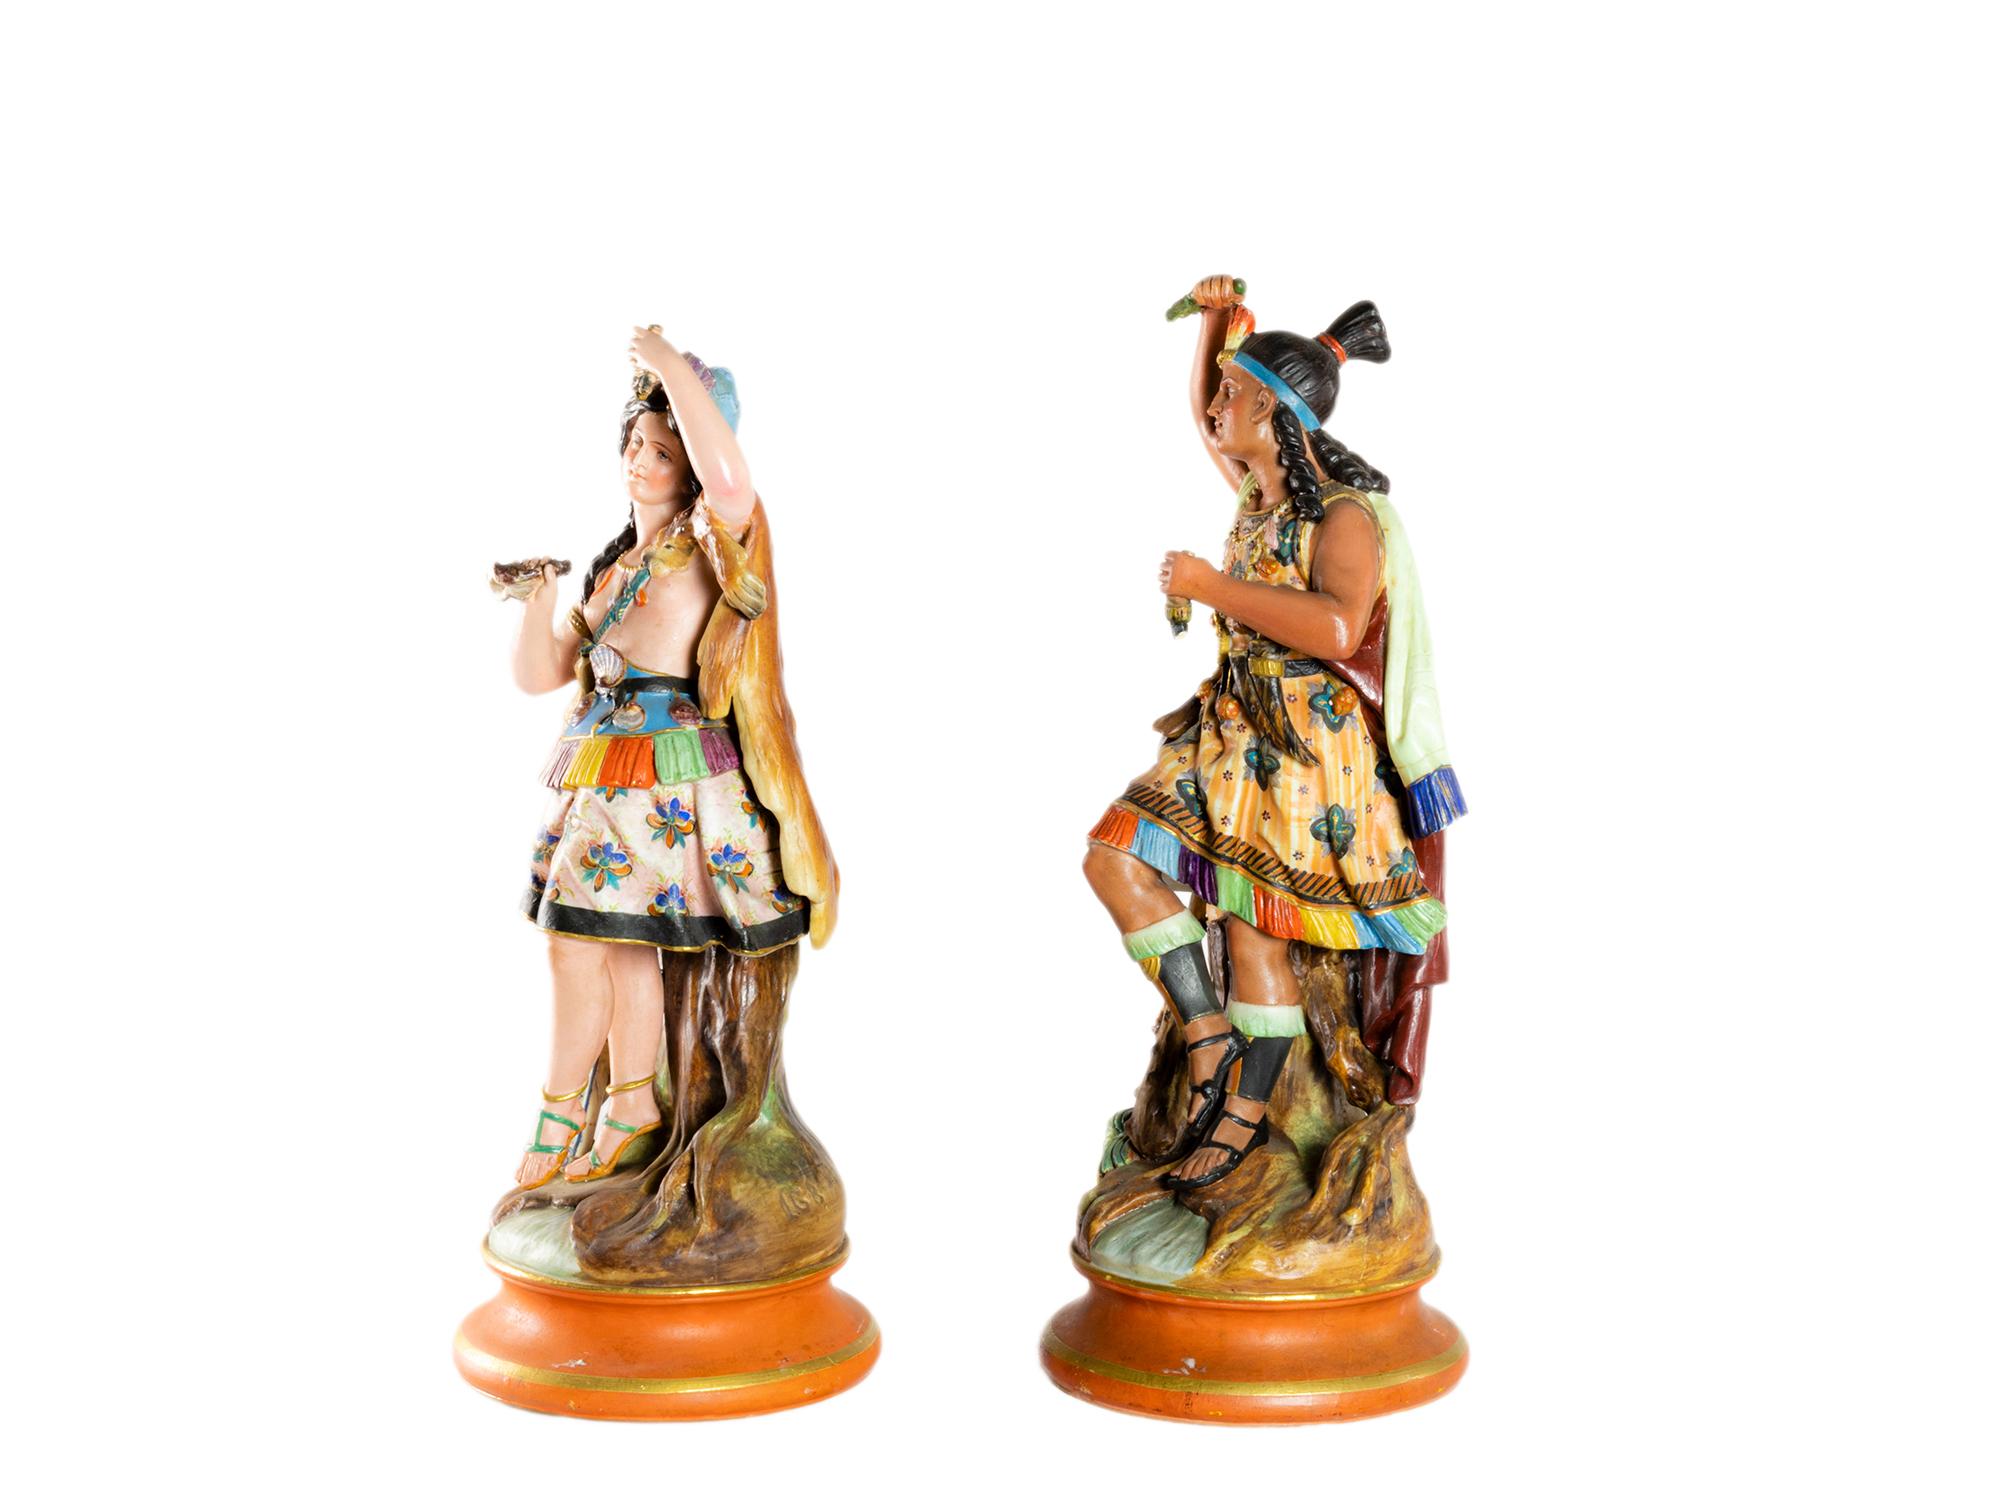 A pair of Inca (peruvian pre-columbian people of indigenes) in full garb.
A splendorous man and woman, denoting leadership and social standing in their ornamentation and gold details. 
An Orientalist inspired work with side and base marks “168” and